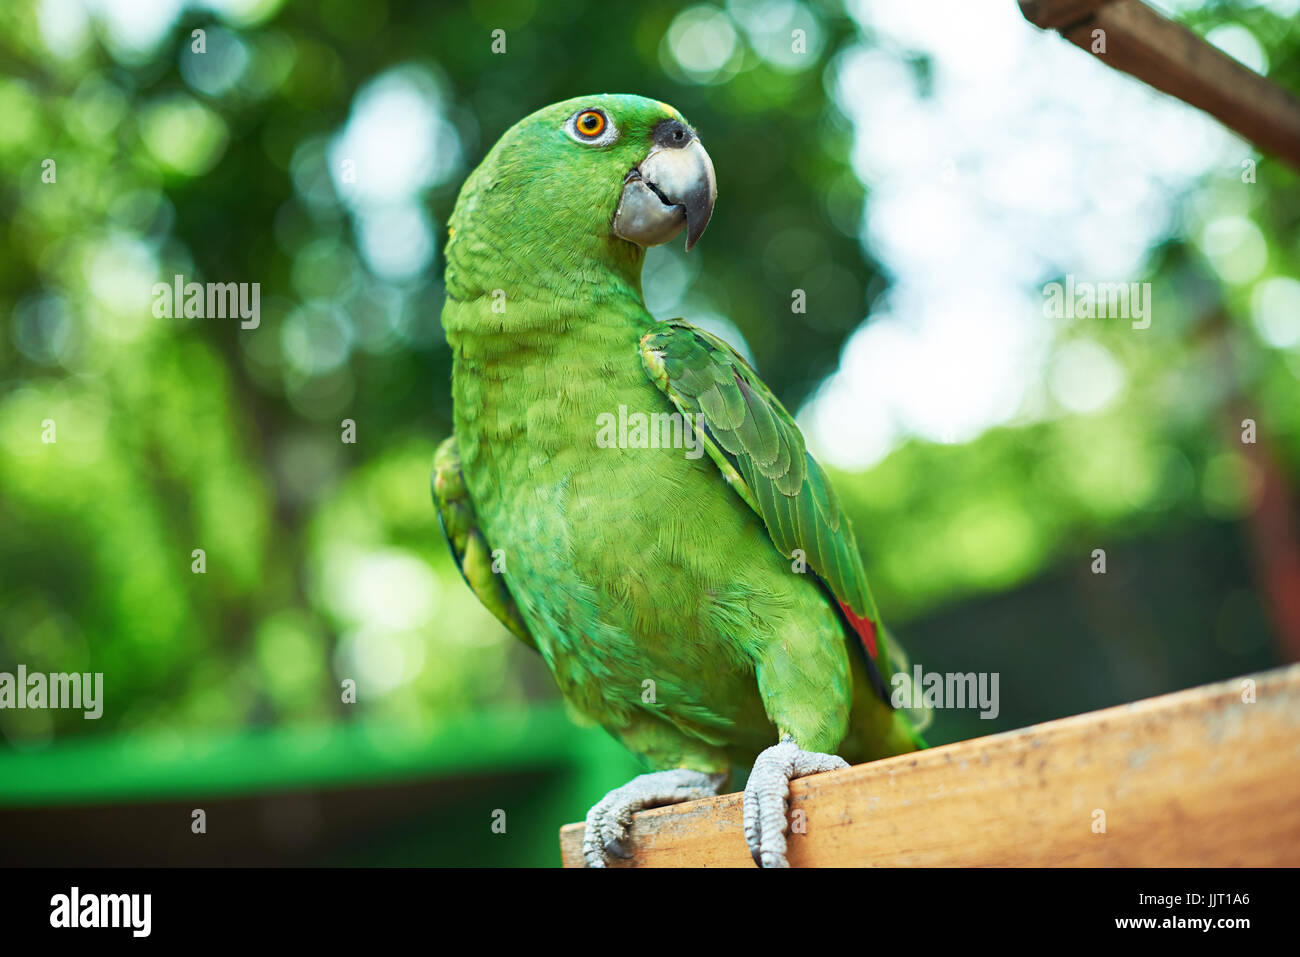 Green parrot sitting on branch on blurred nature background Stock Photo